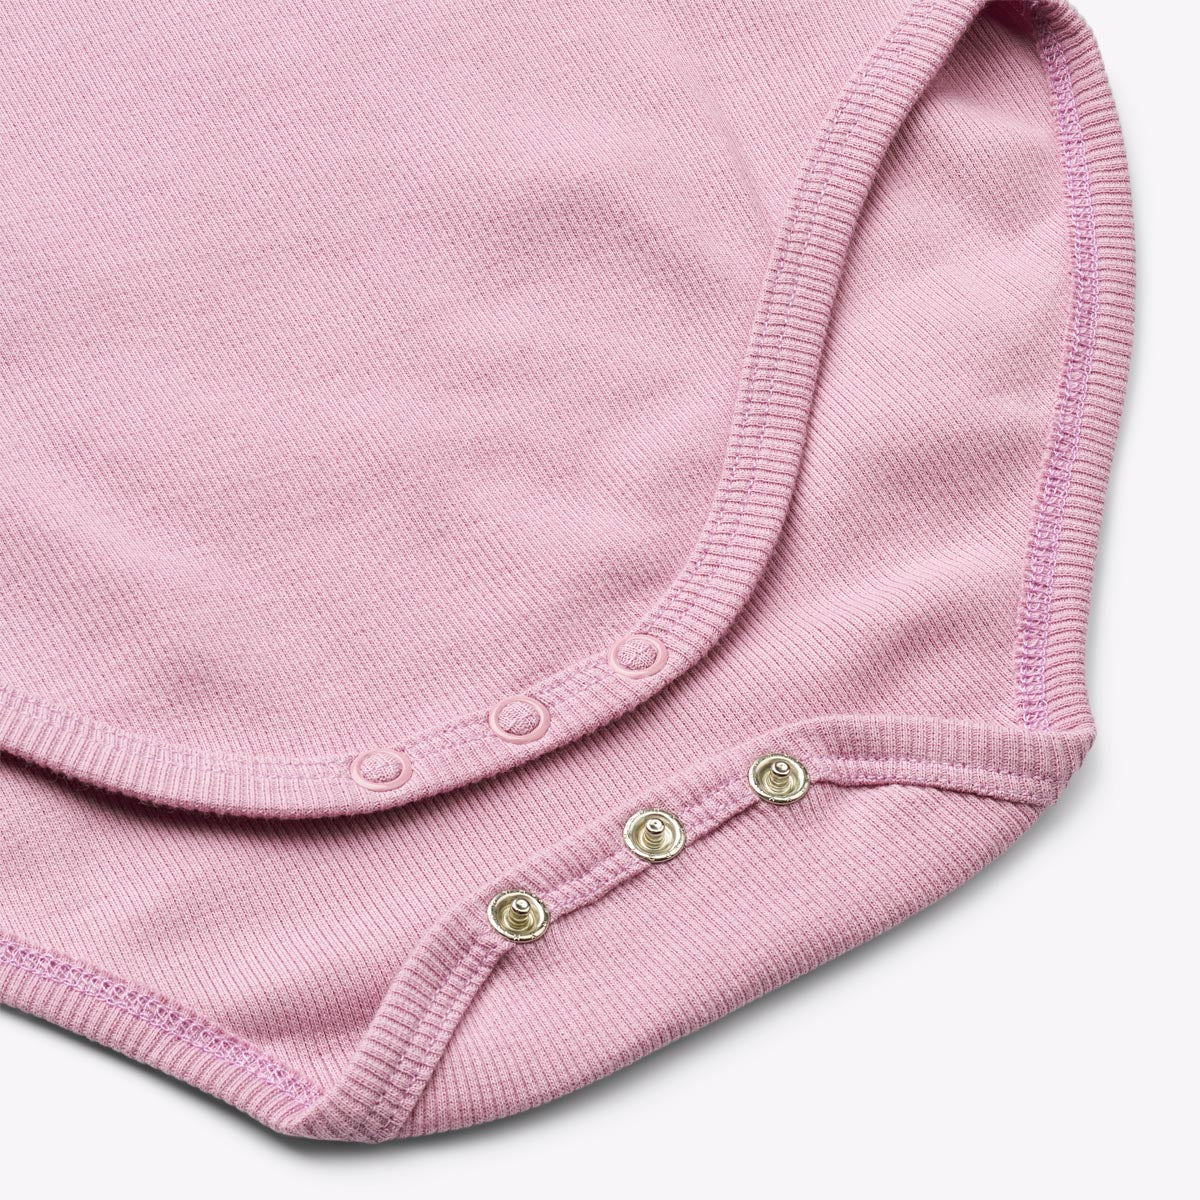 BANA Long Sleeve, organic bodysuit for disabled children - Pastel Purple (snap buttons for diapers)